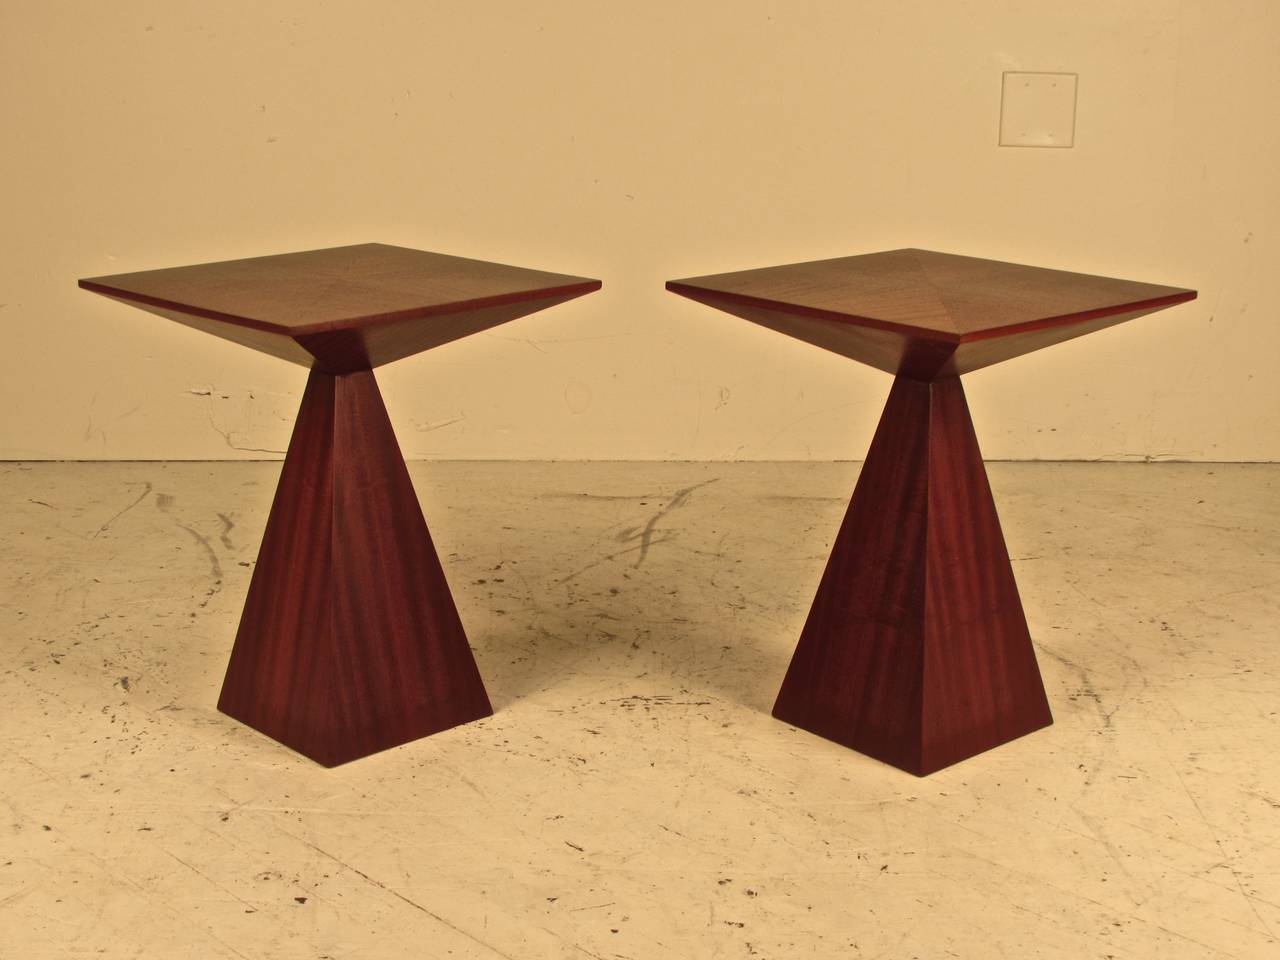 Pair of stunning hyper-rare side tables from the Harvey Probber Studio. These are made of bookmatched ribbon mahogany that literally glimmers from certain vantage points. Fully restored and in exceptional condition.